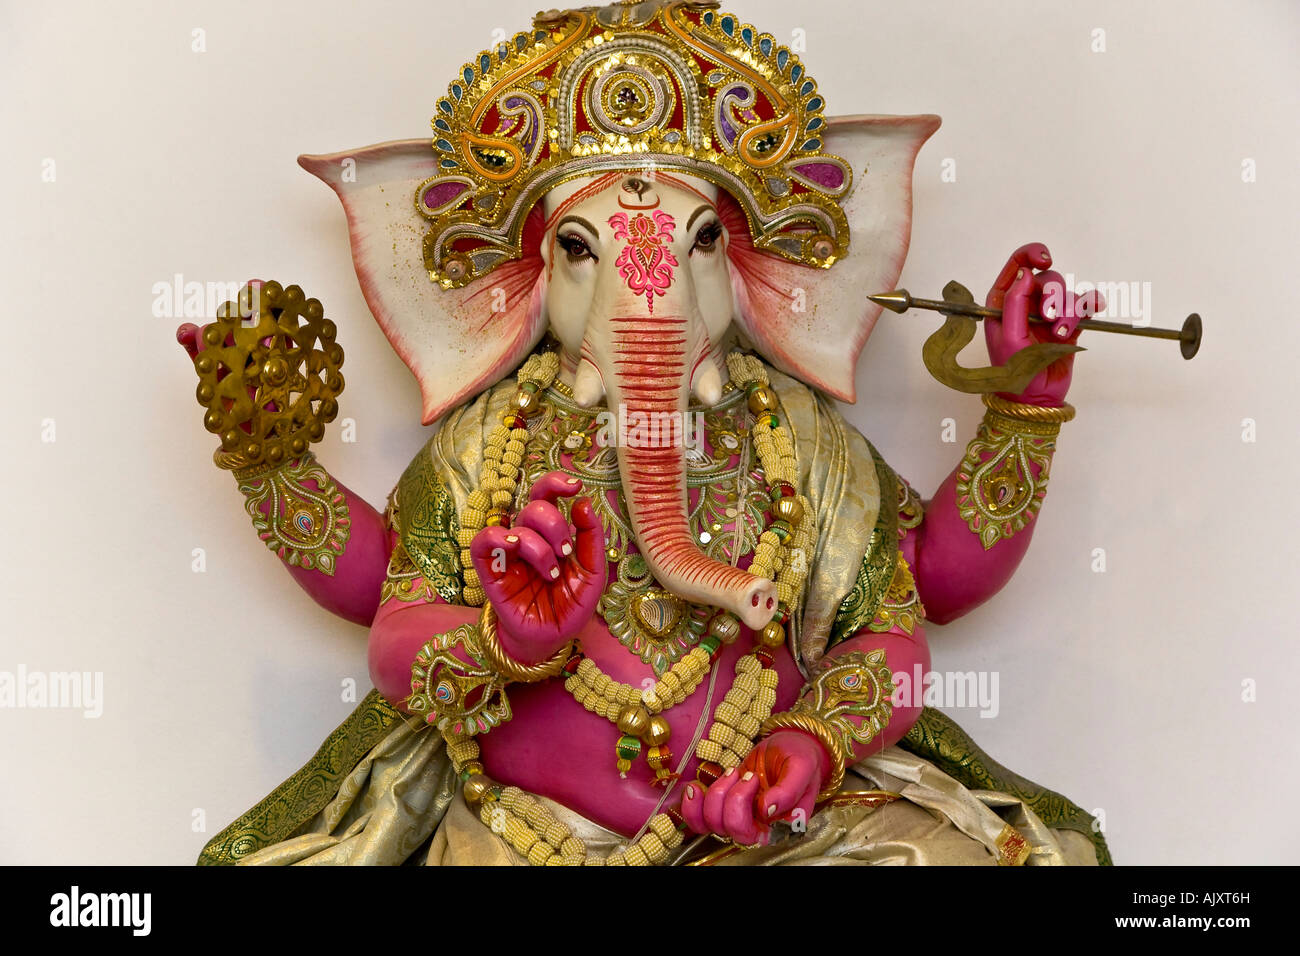 The Elephant God in lotus position Stock Photo